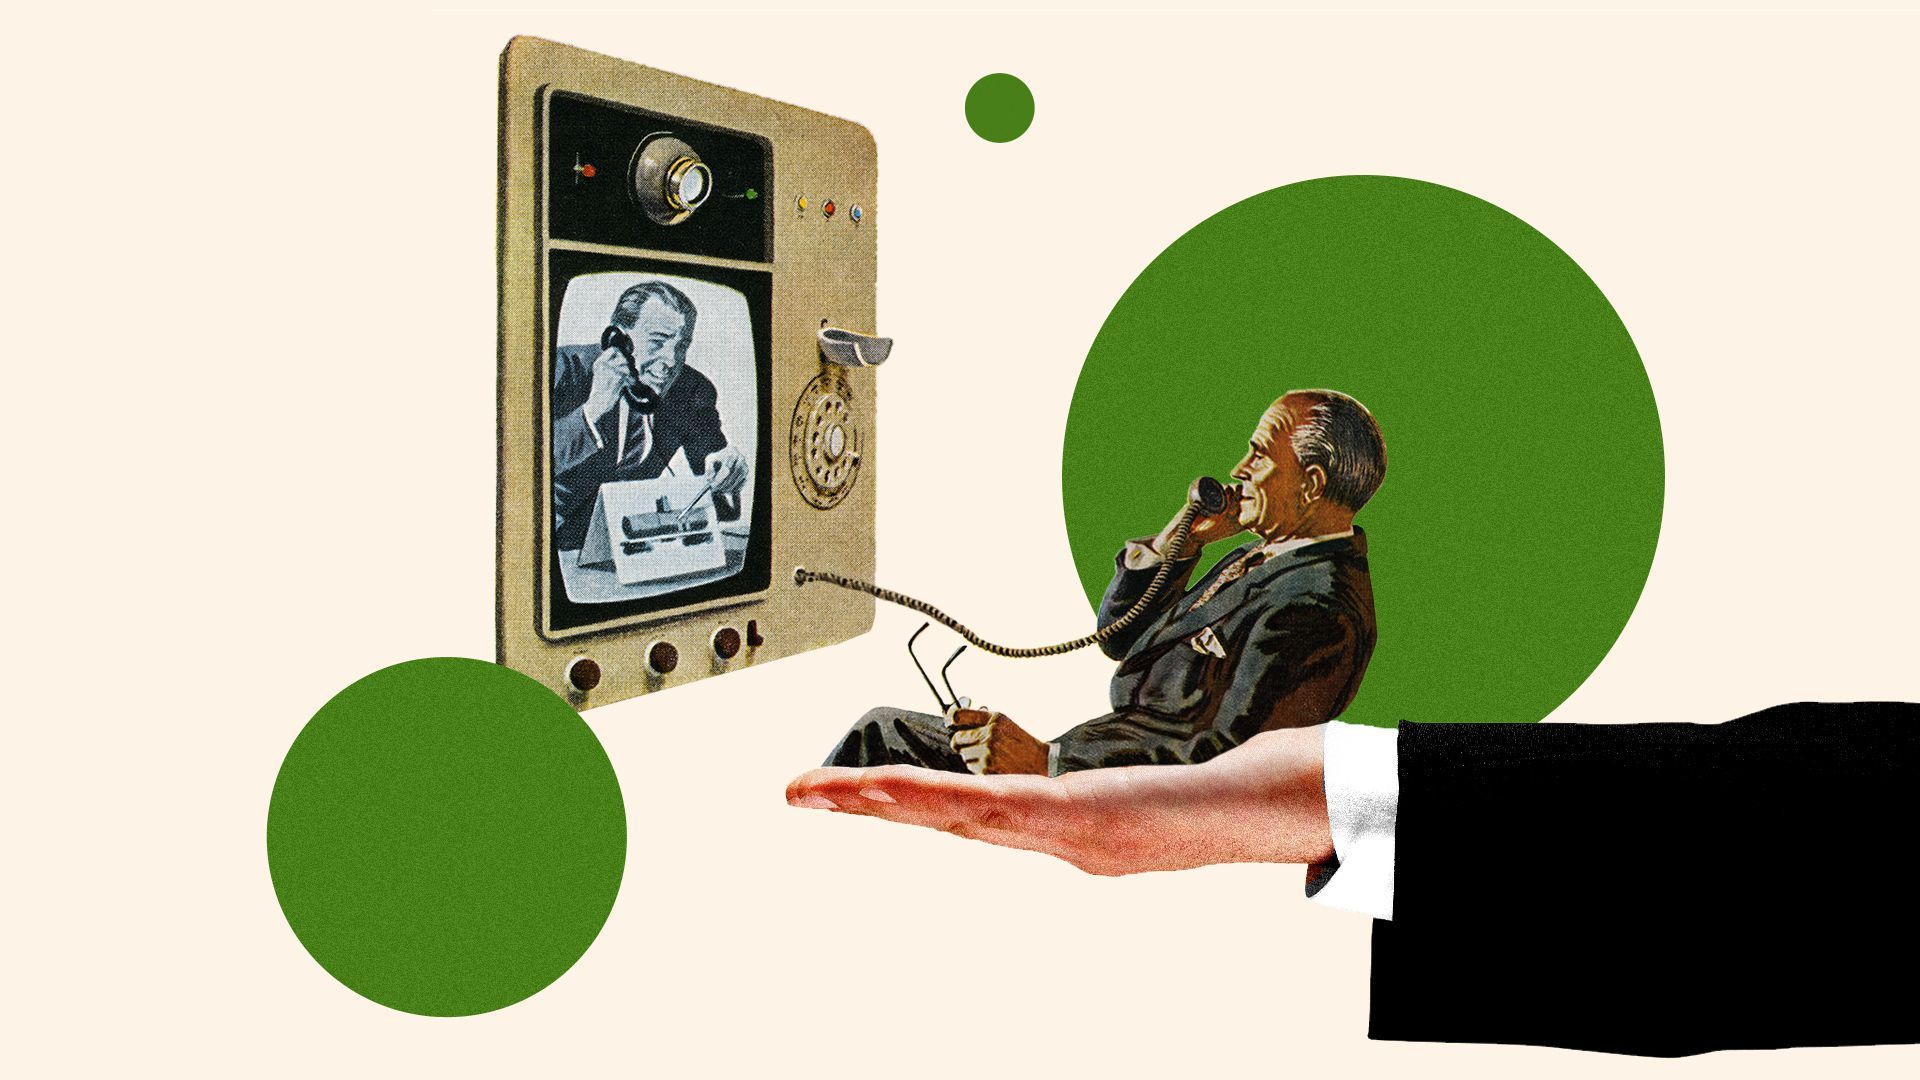 Photo collage of an archival photo of a man on a video phone being held by an outstretched arm